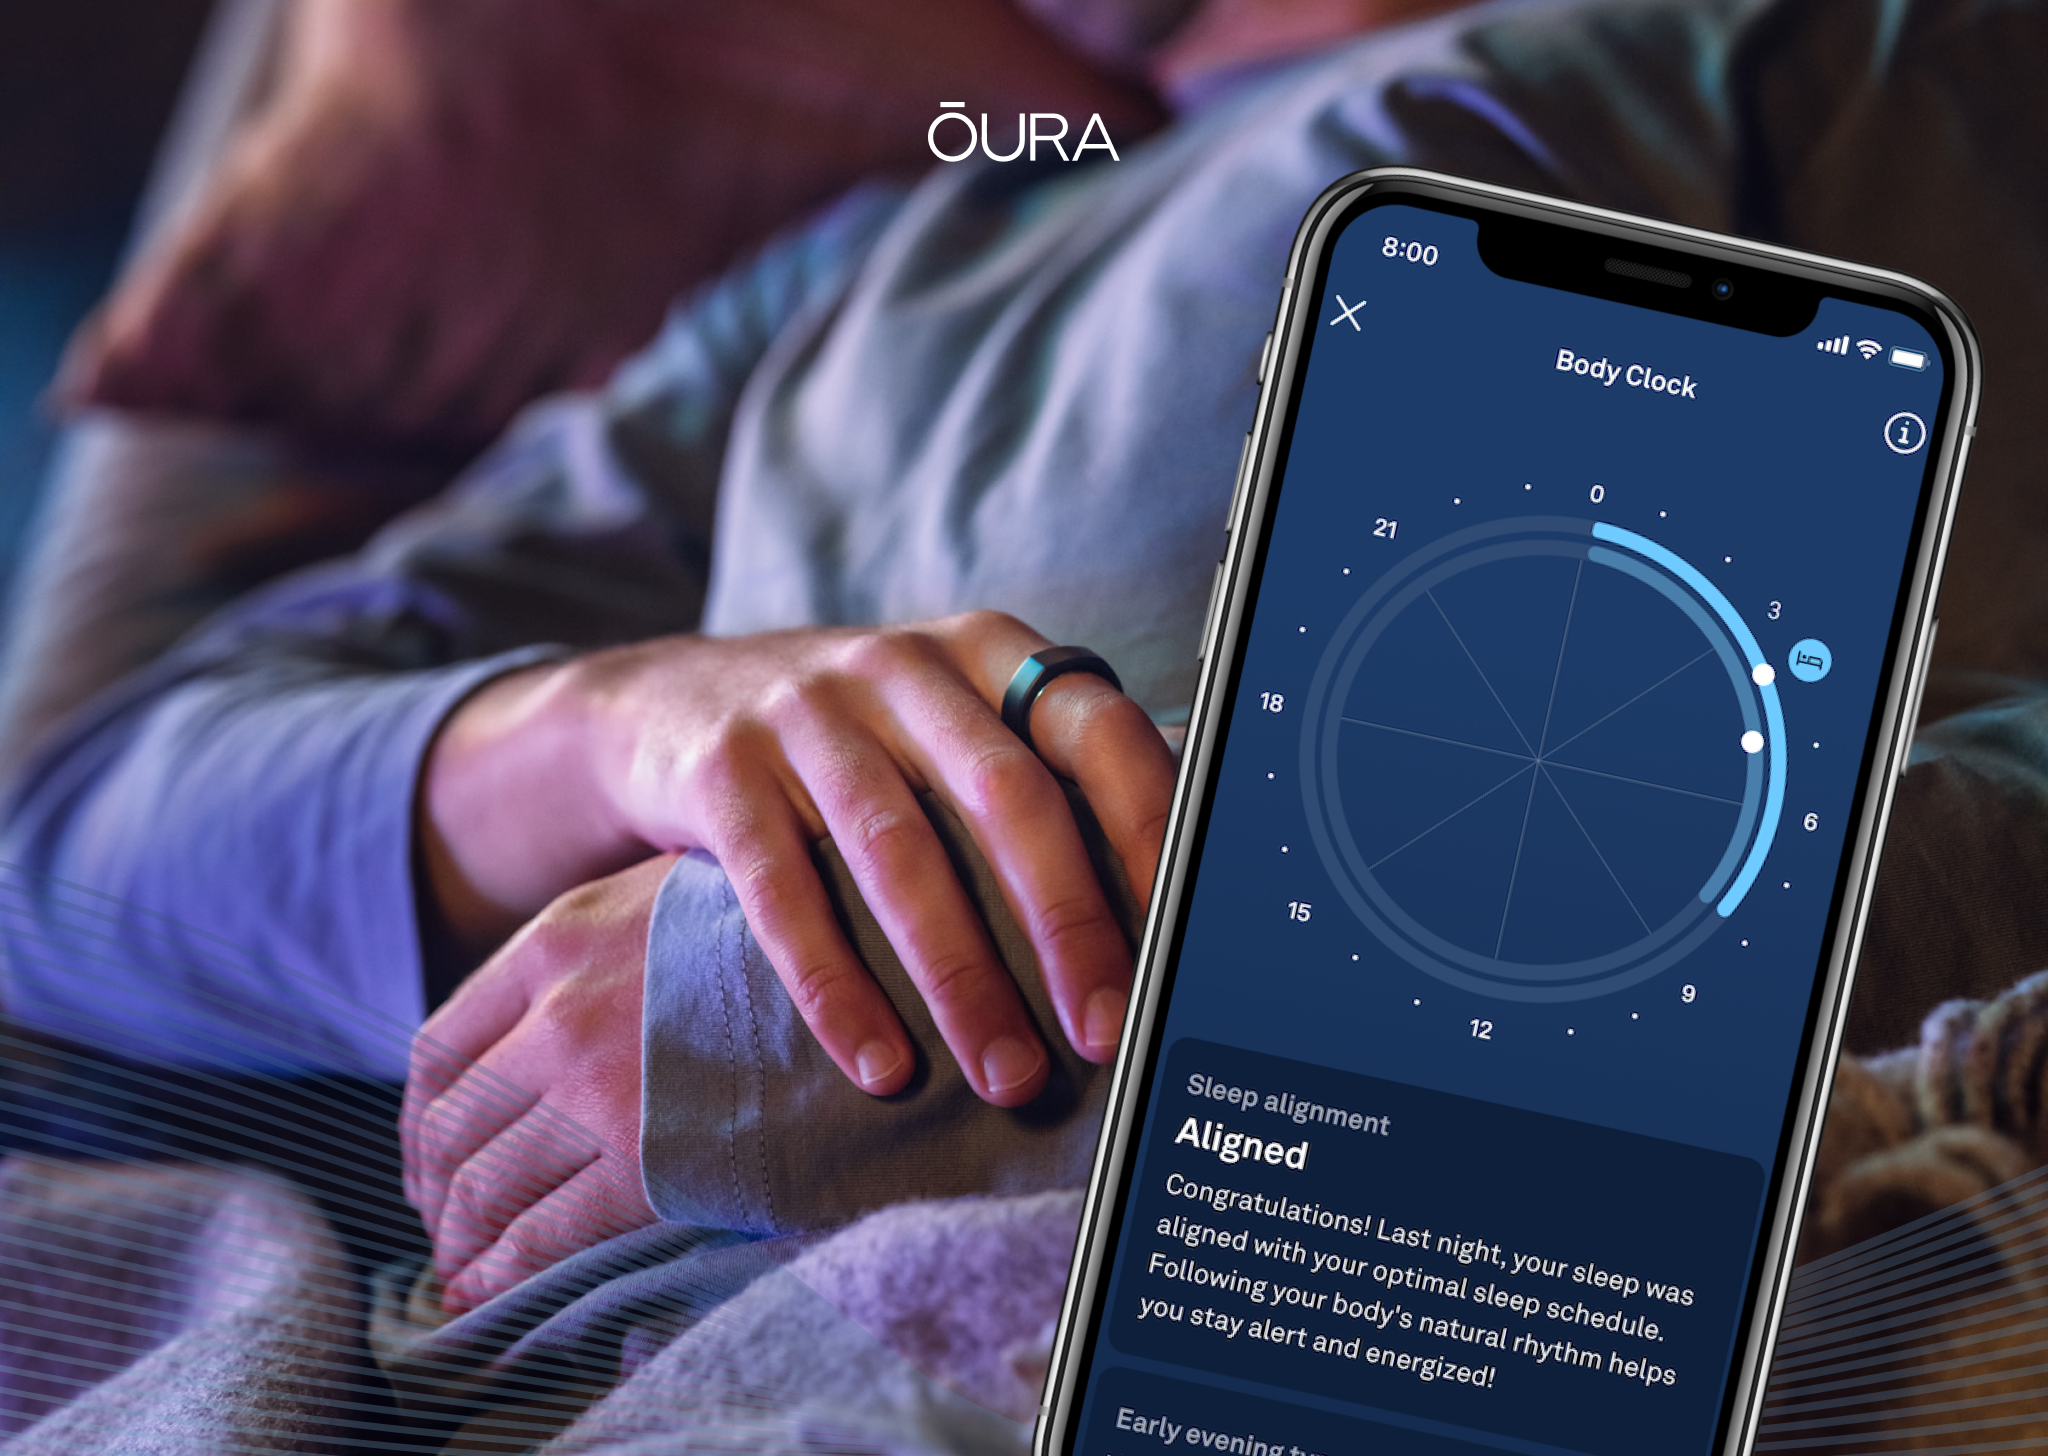 Oura App Screenshot of the Body Clock Feature